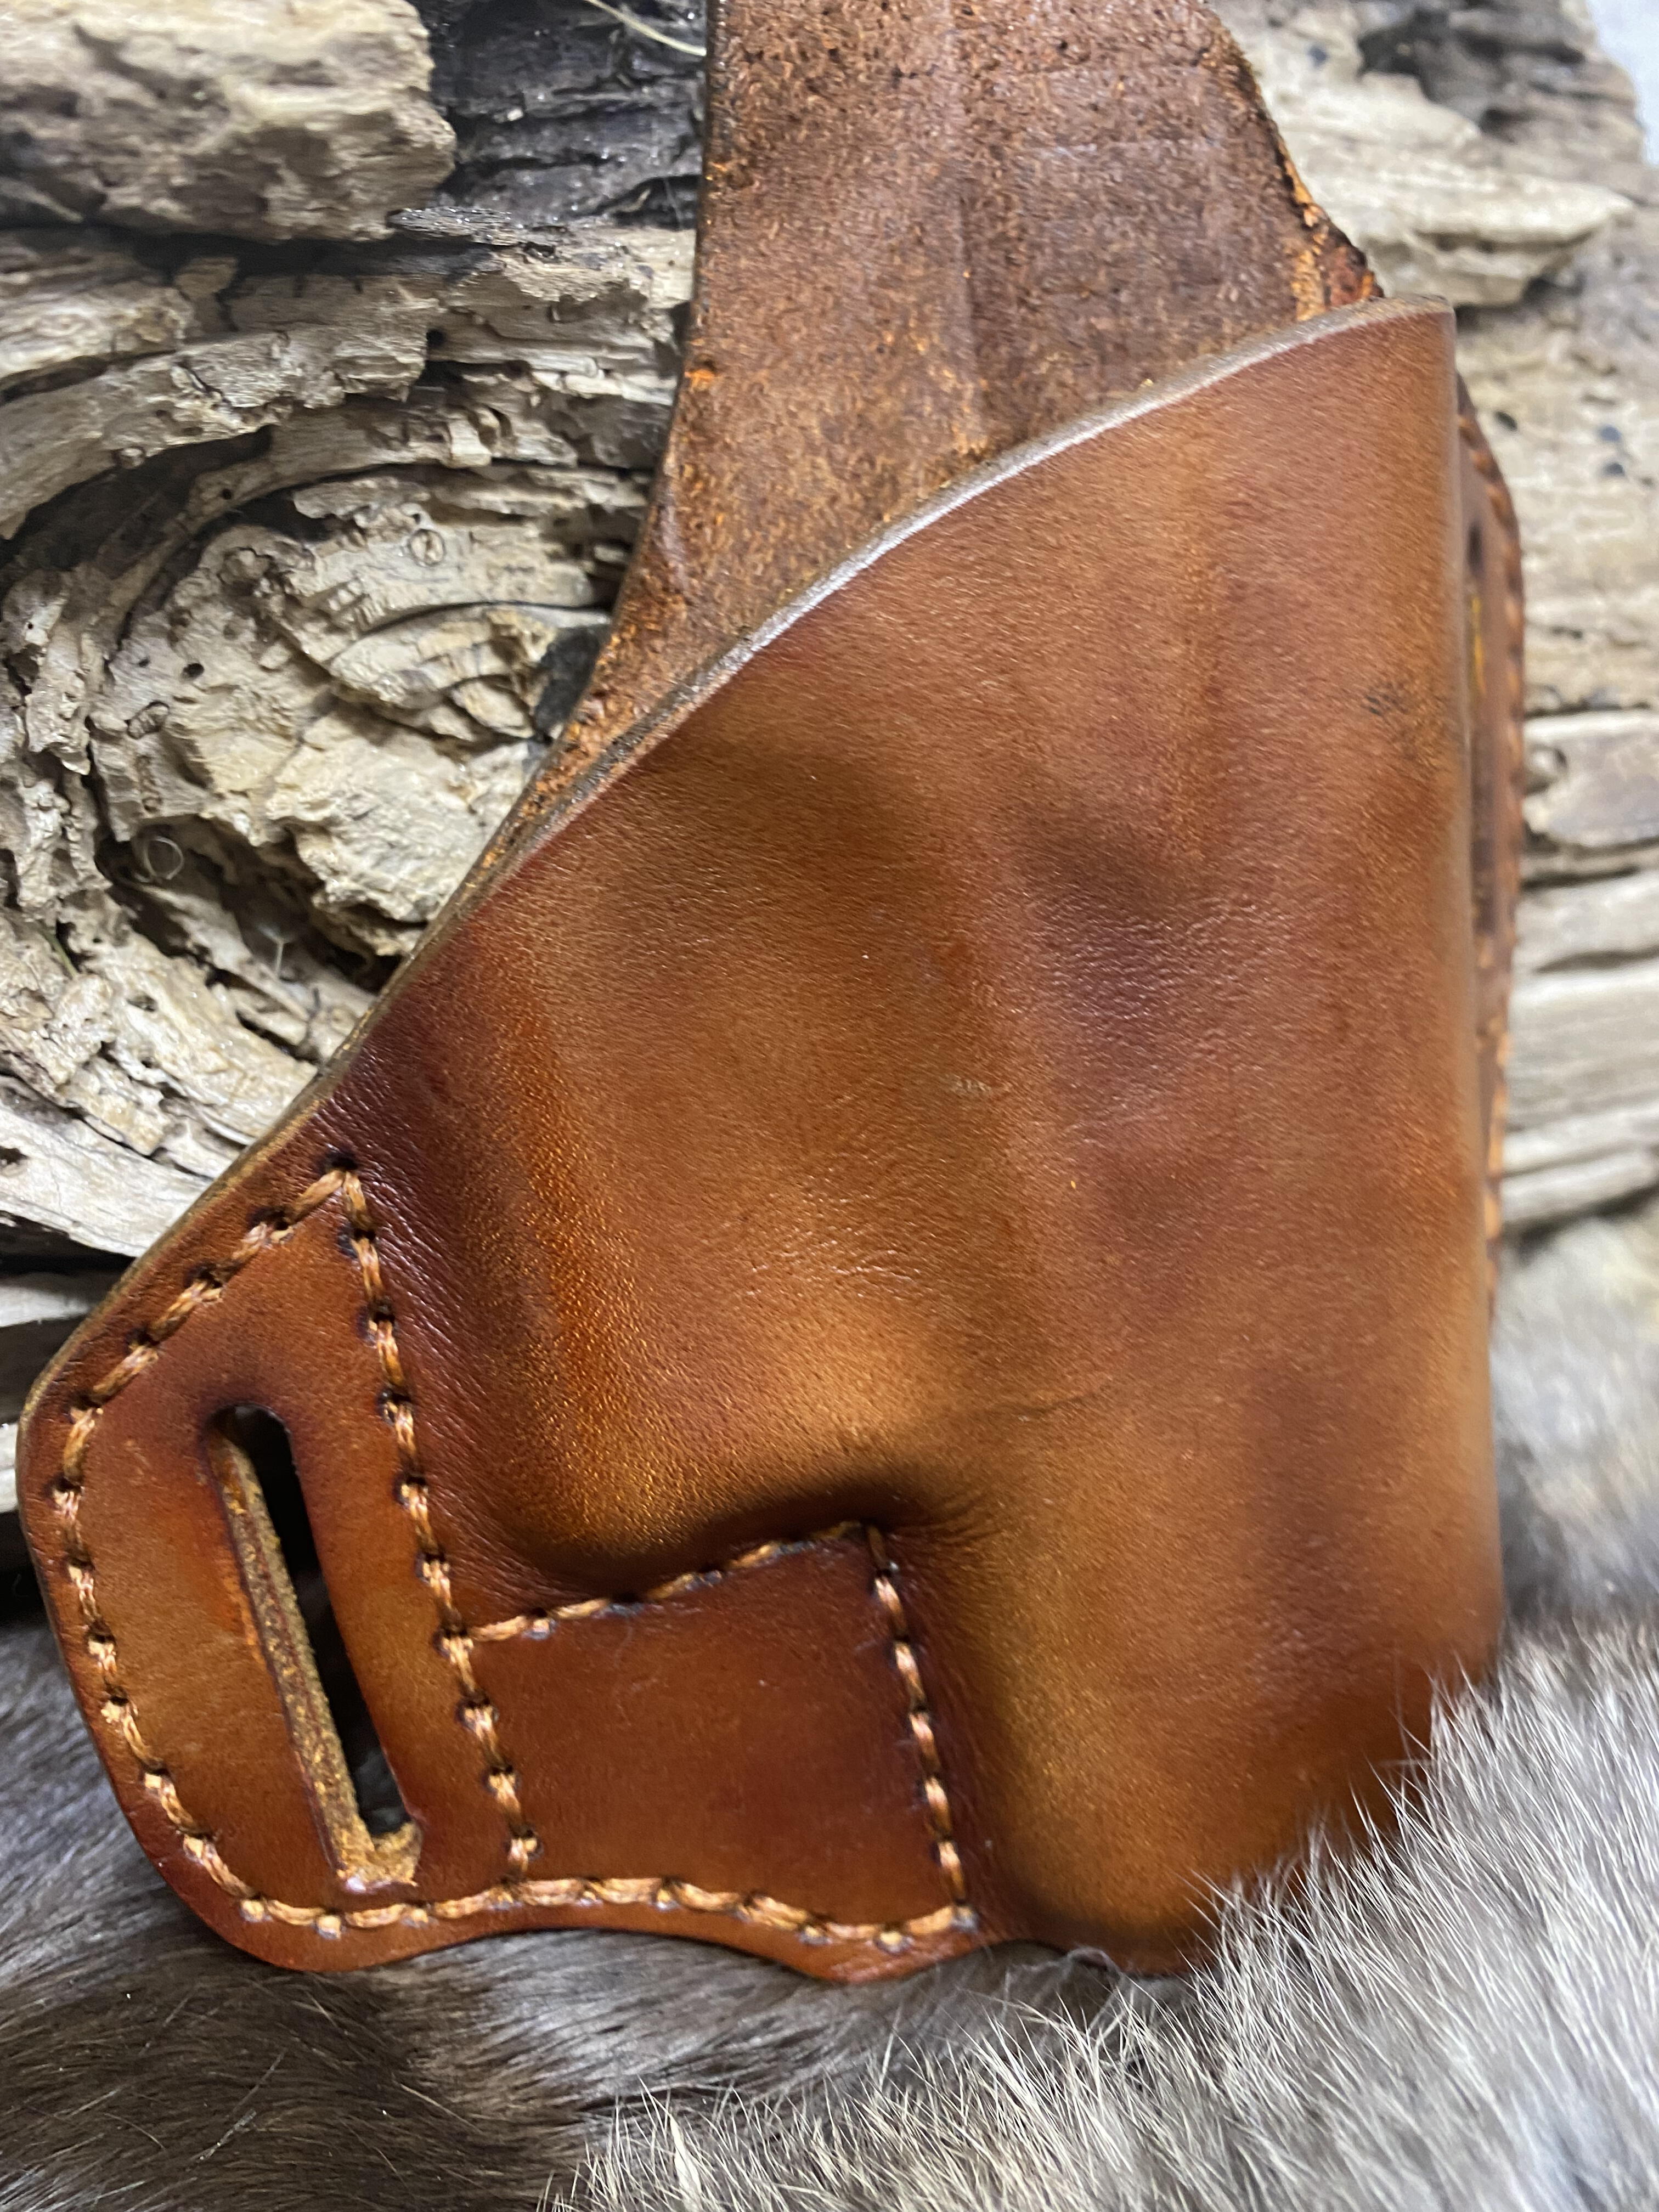 Details about   Leather Pancake OWB Holster for Glock 42 Handmade in the USA Black or Brown 